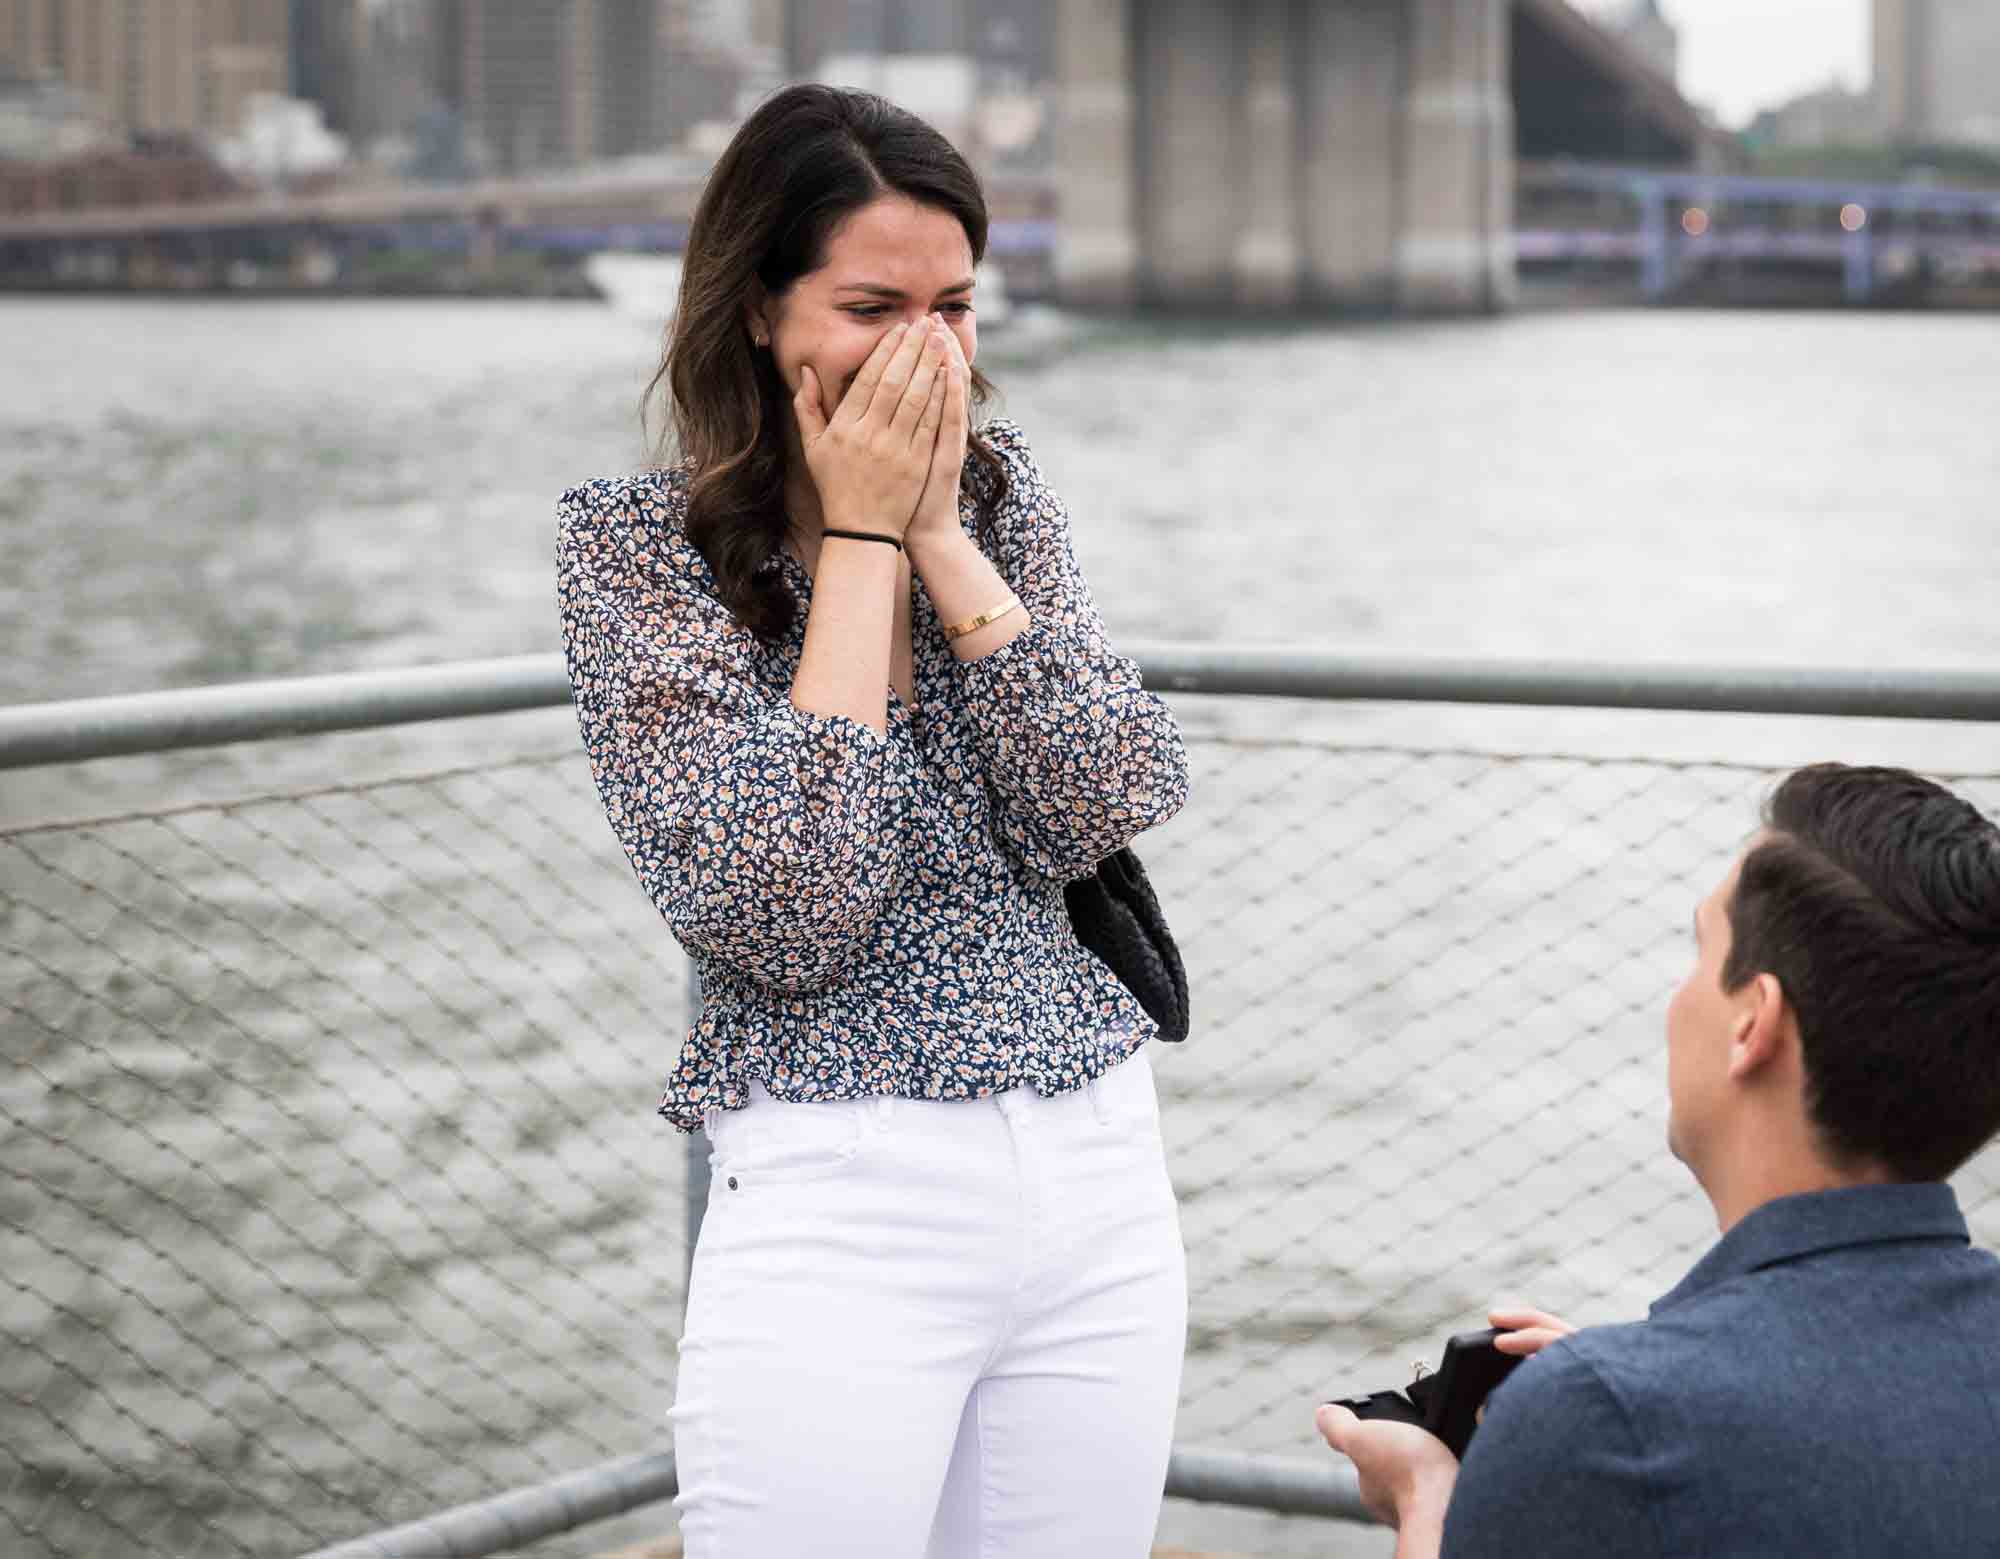 Woman with hands covering her face in shock in front of man holding engagement ring box for an article on Brooklyn Bridge Park rainy day photo locations